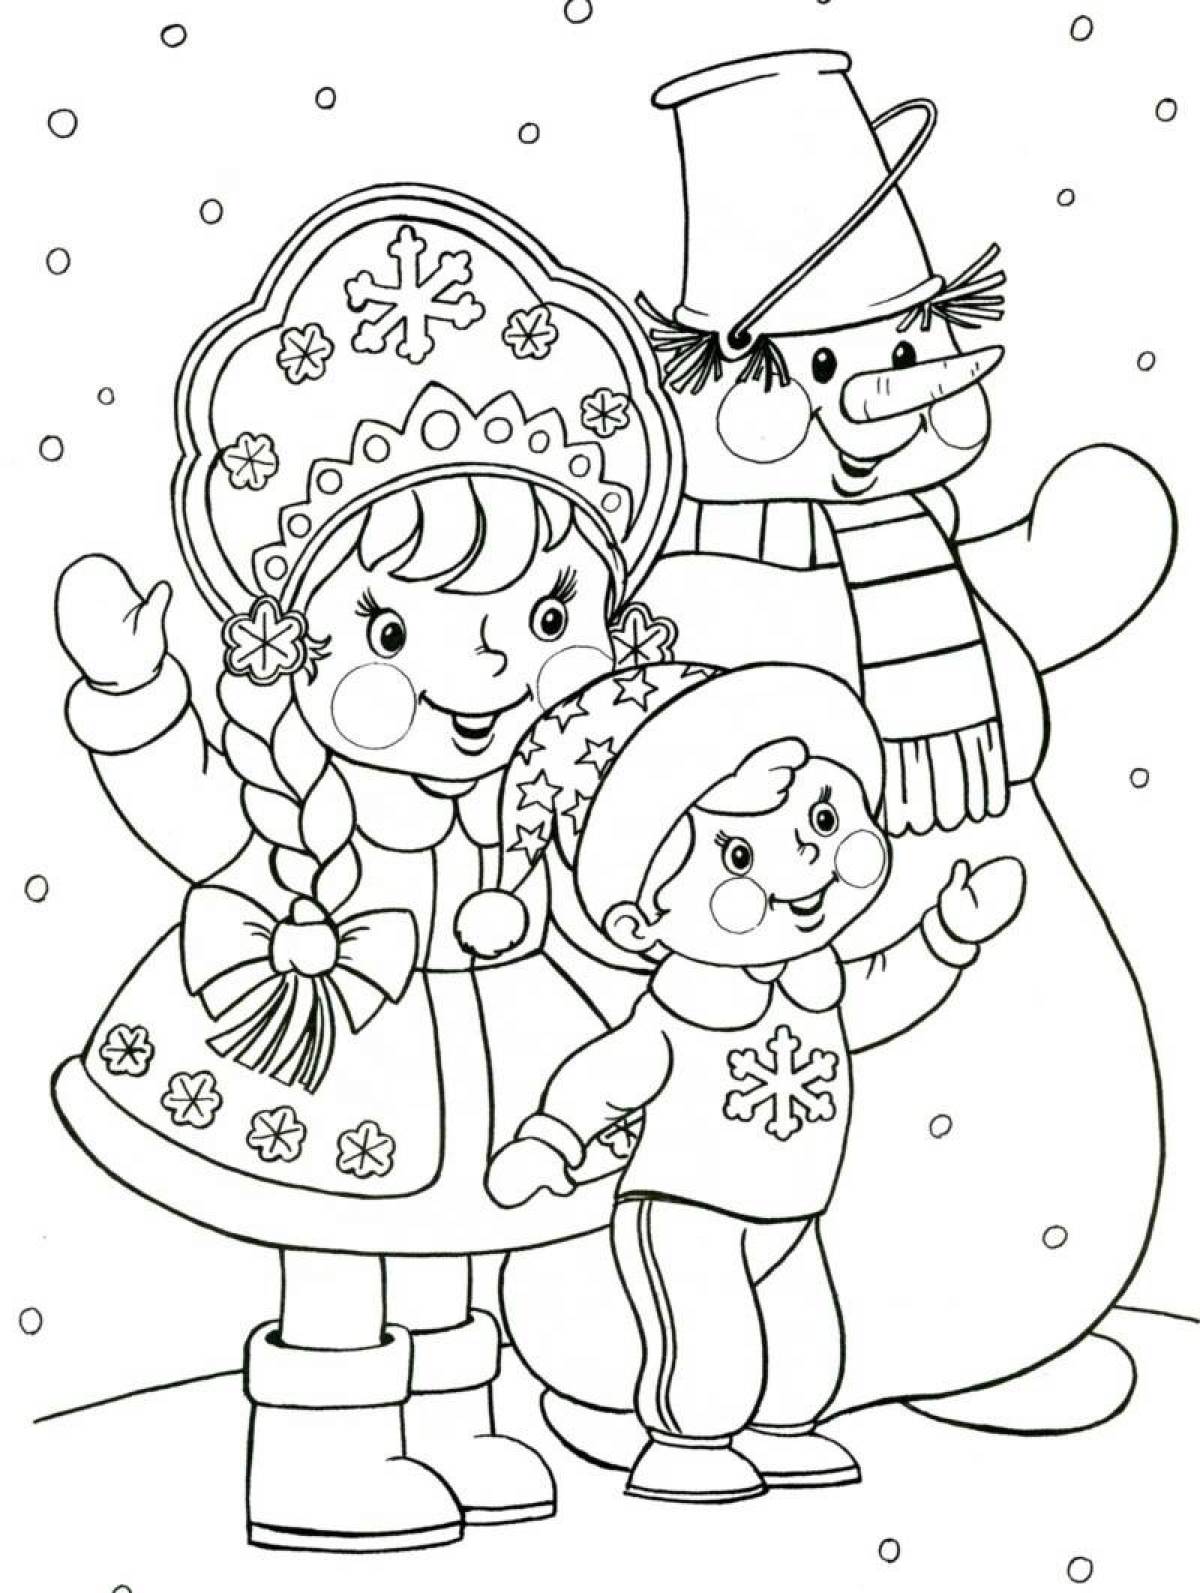 Fascinating Christmas coloring book for kids